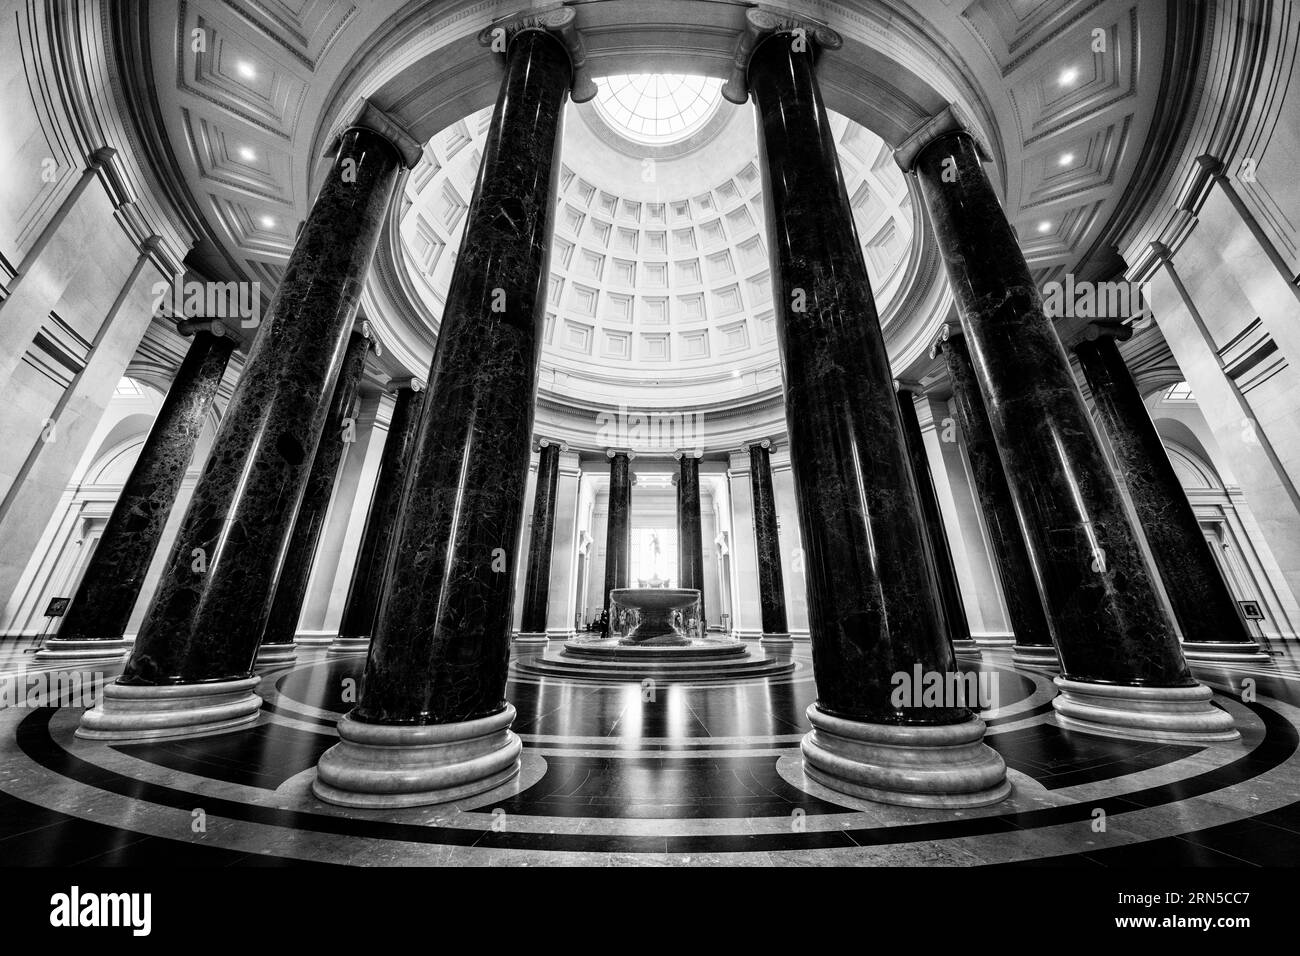 WASHINGTON DC, United States — A wide-angle photo of the interior of the rotunda at the heart of the National Gallery of Art in Washington DC. The rotunda of the National Gallery of Art shines with architectural details and ambient light. Serving as the heart of the gallery, this central space not only offers a calm respite for visitors but also exemplifies the institution's dedication to art and culture in the nation's capital. Stock Photo